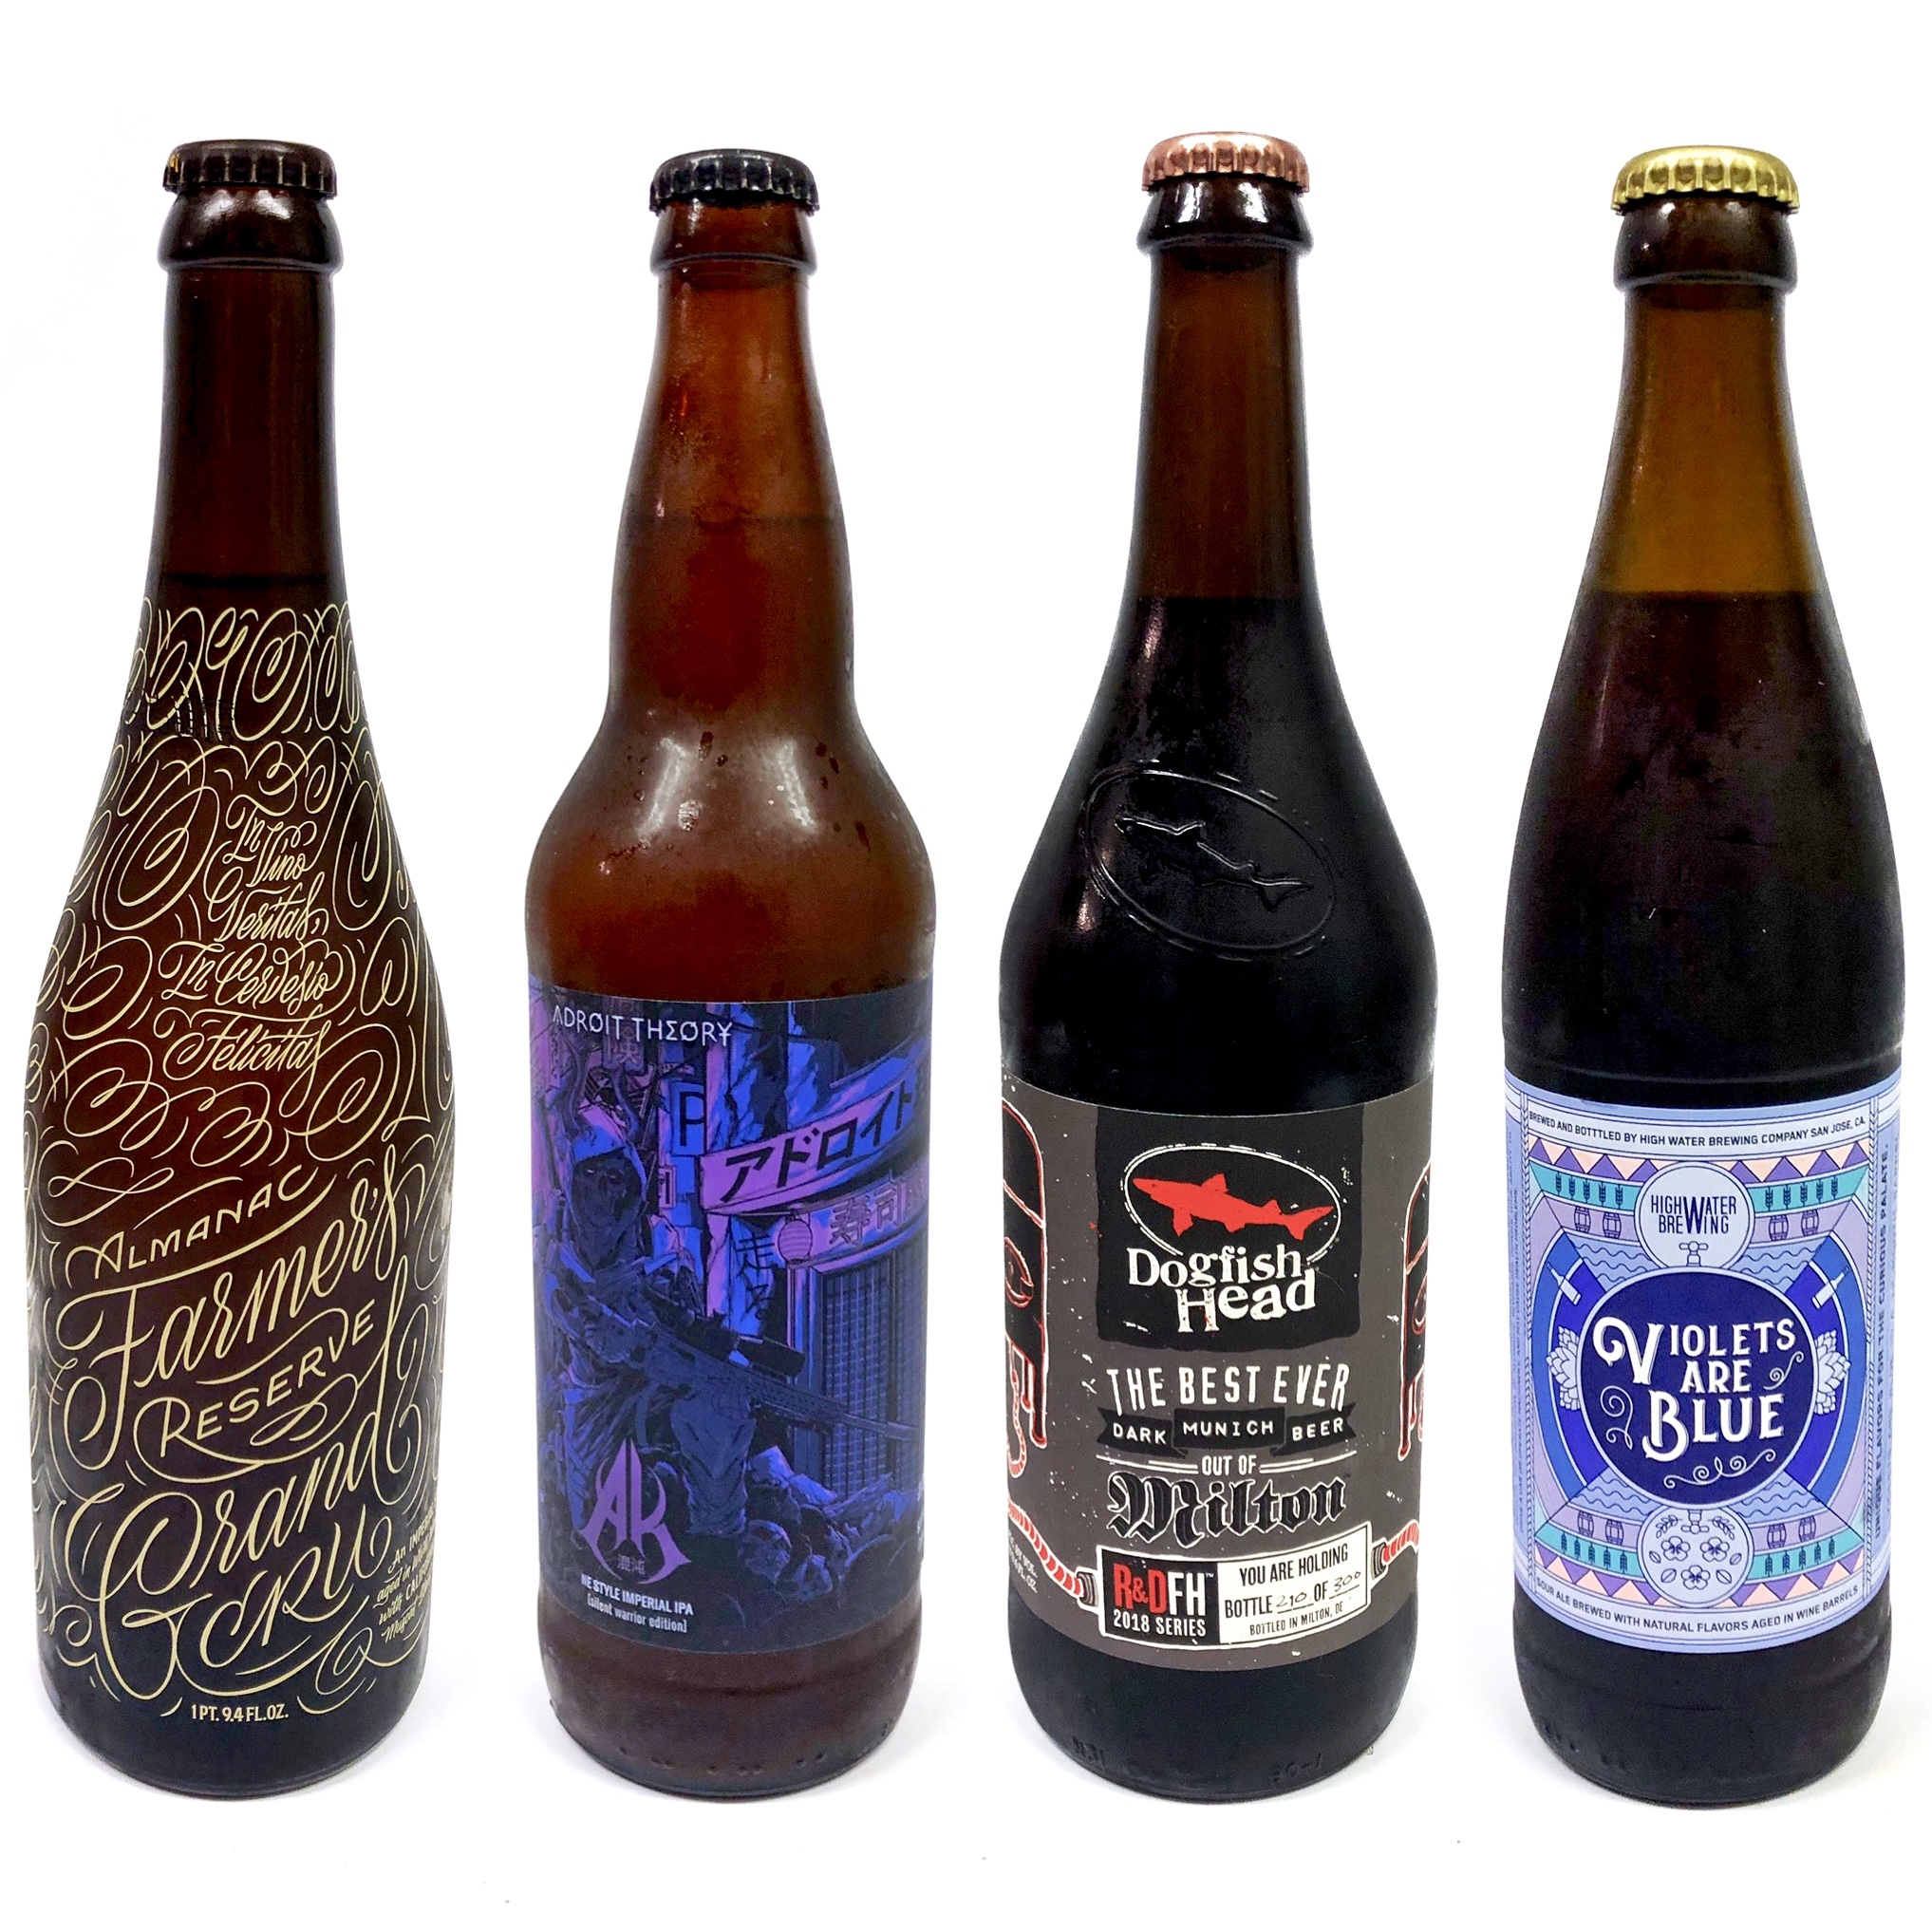 Pictured: Four bottles of beer from this week's episode.